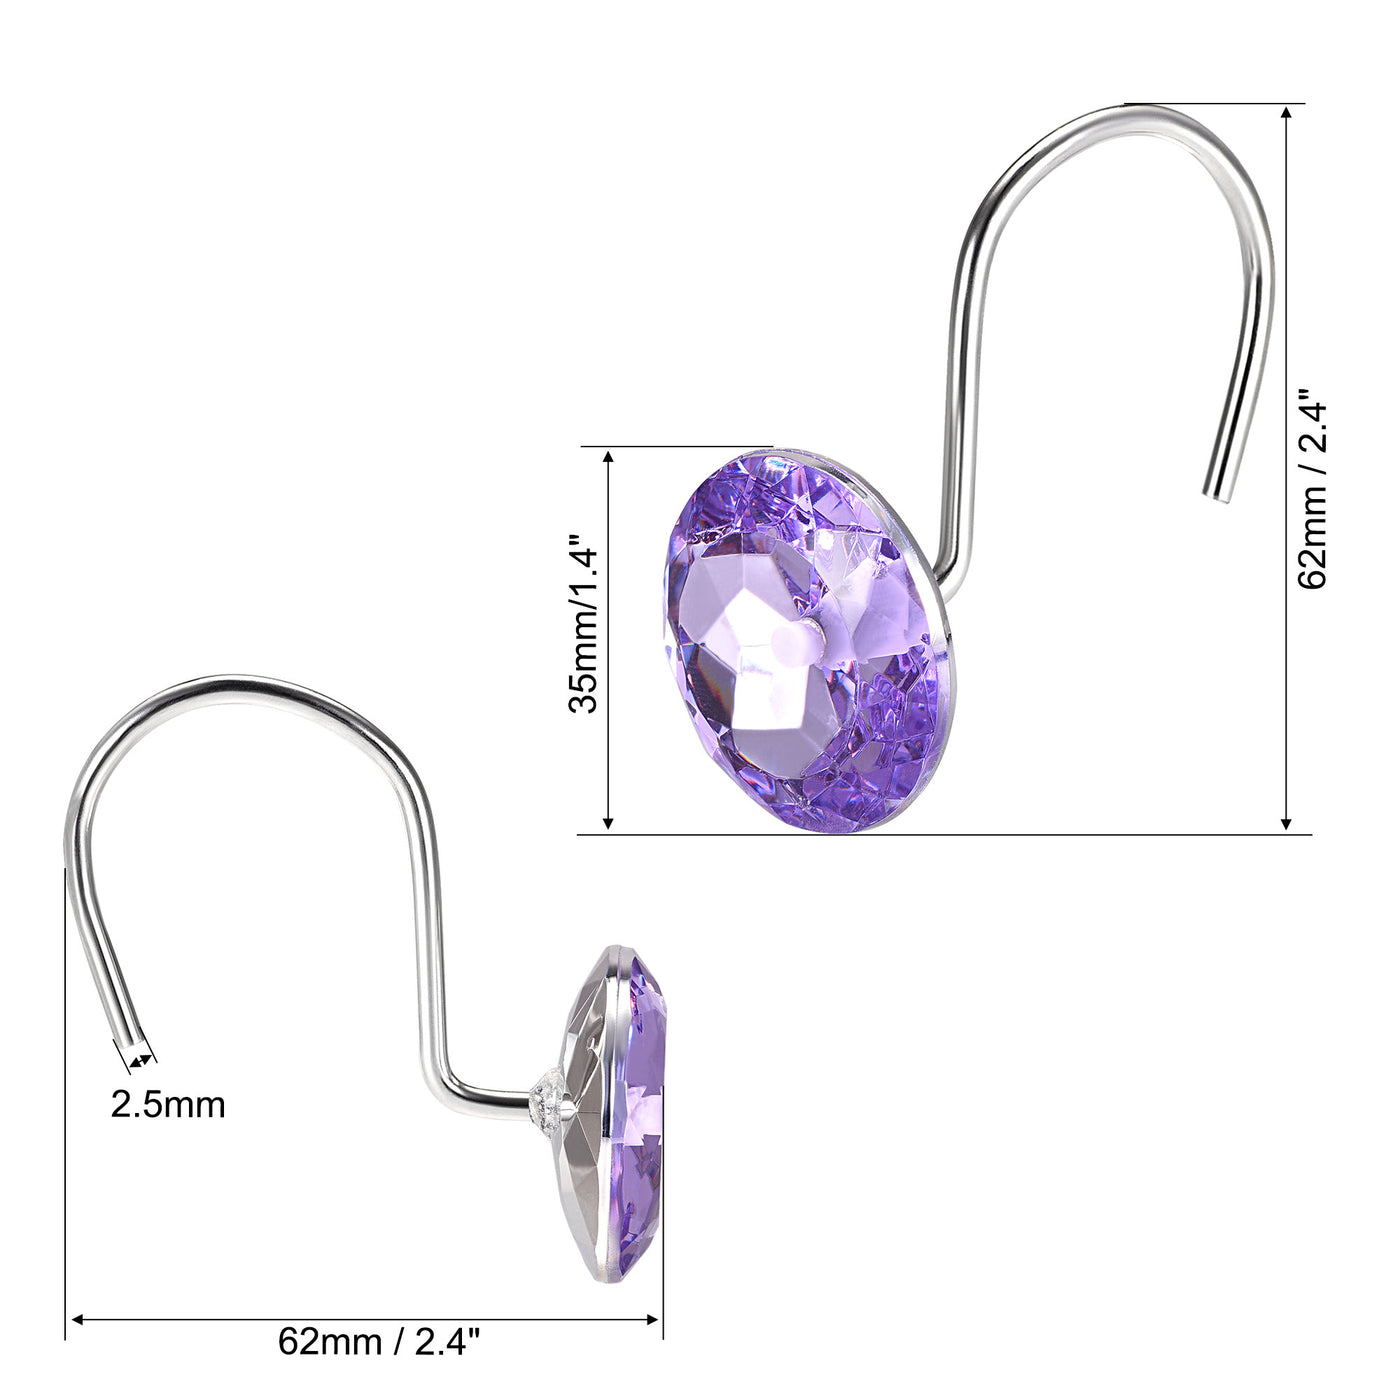 uxcell Uxcell Shower Curtain Hooks for Bathroom, Stainless Steel Acrylic Fashion Decorative Hook Rings, Curtain Rod Hangers Purple 12Pcs